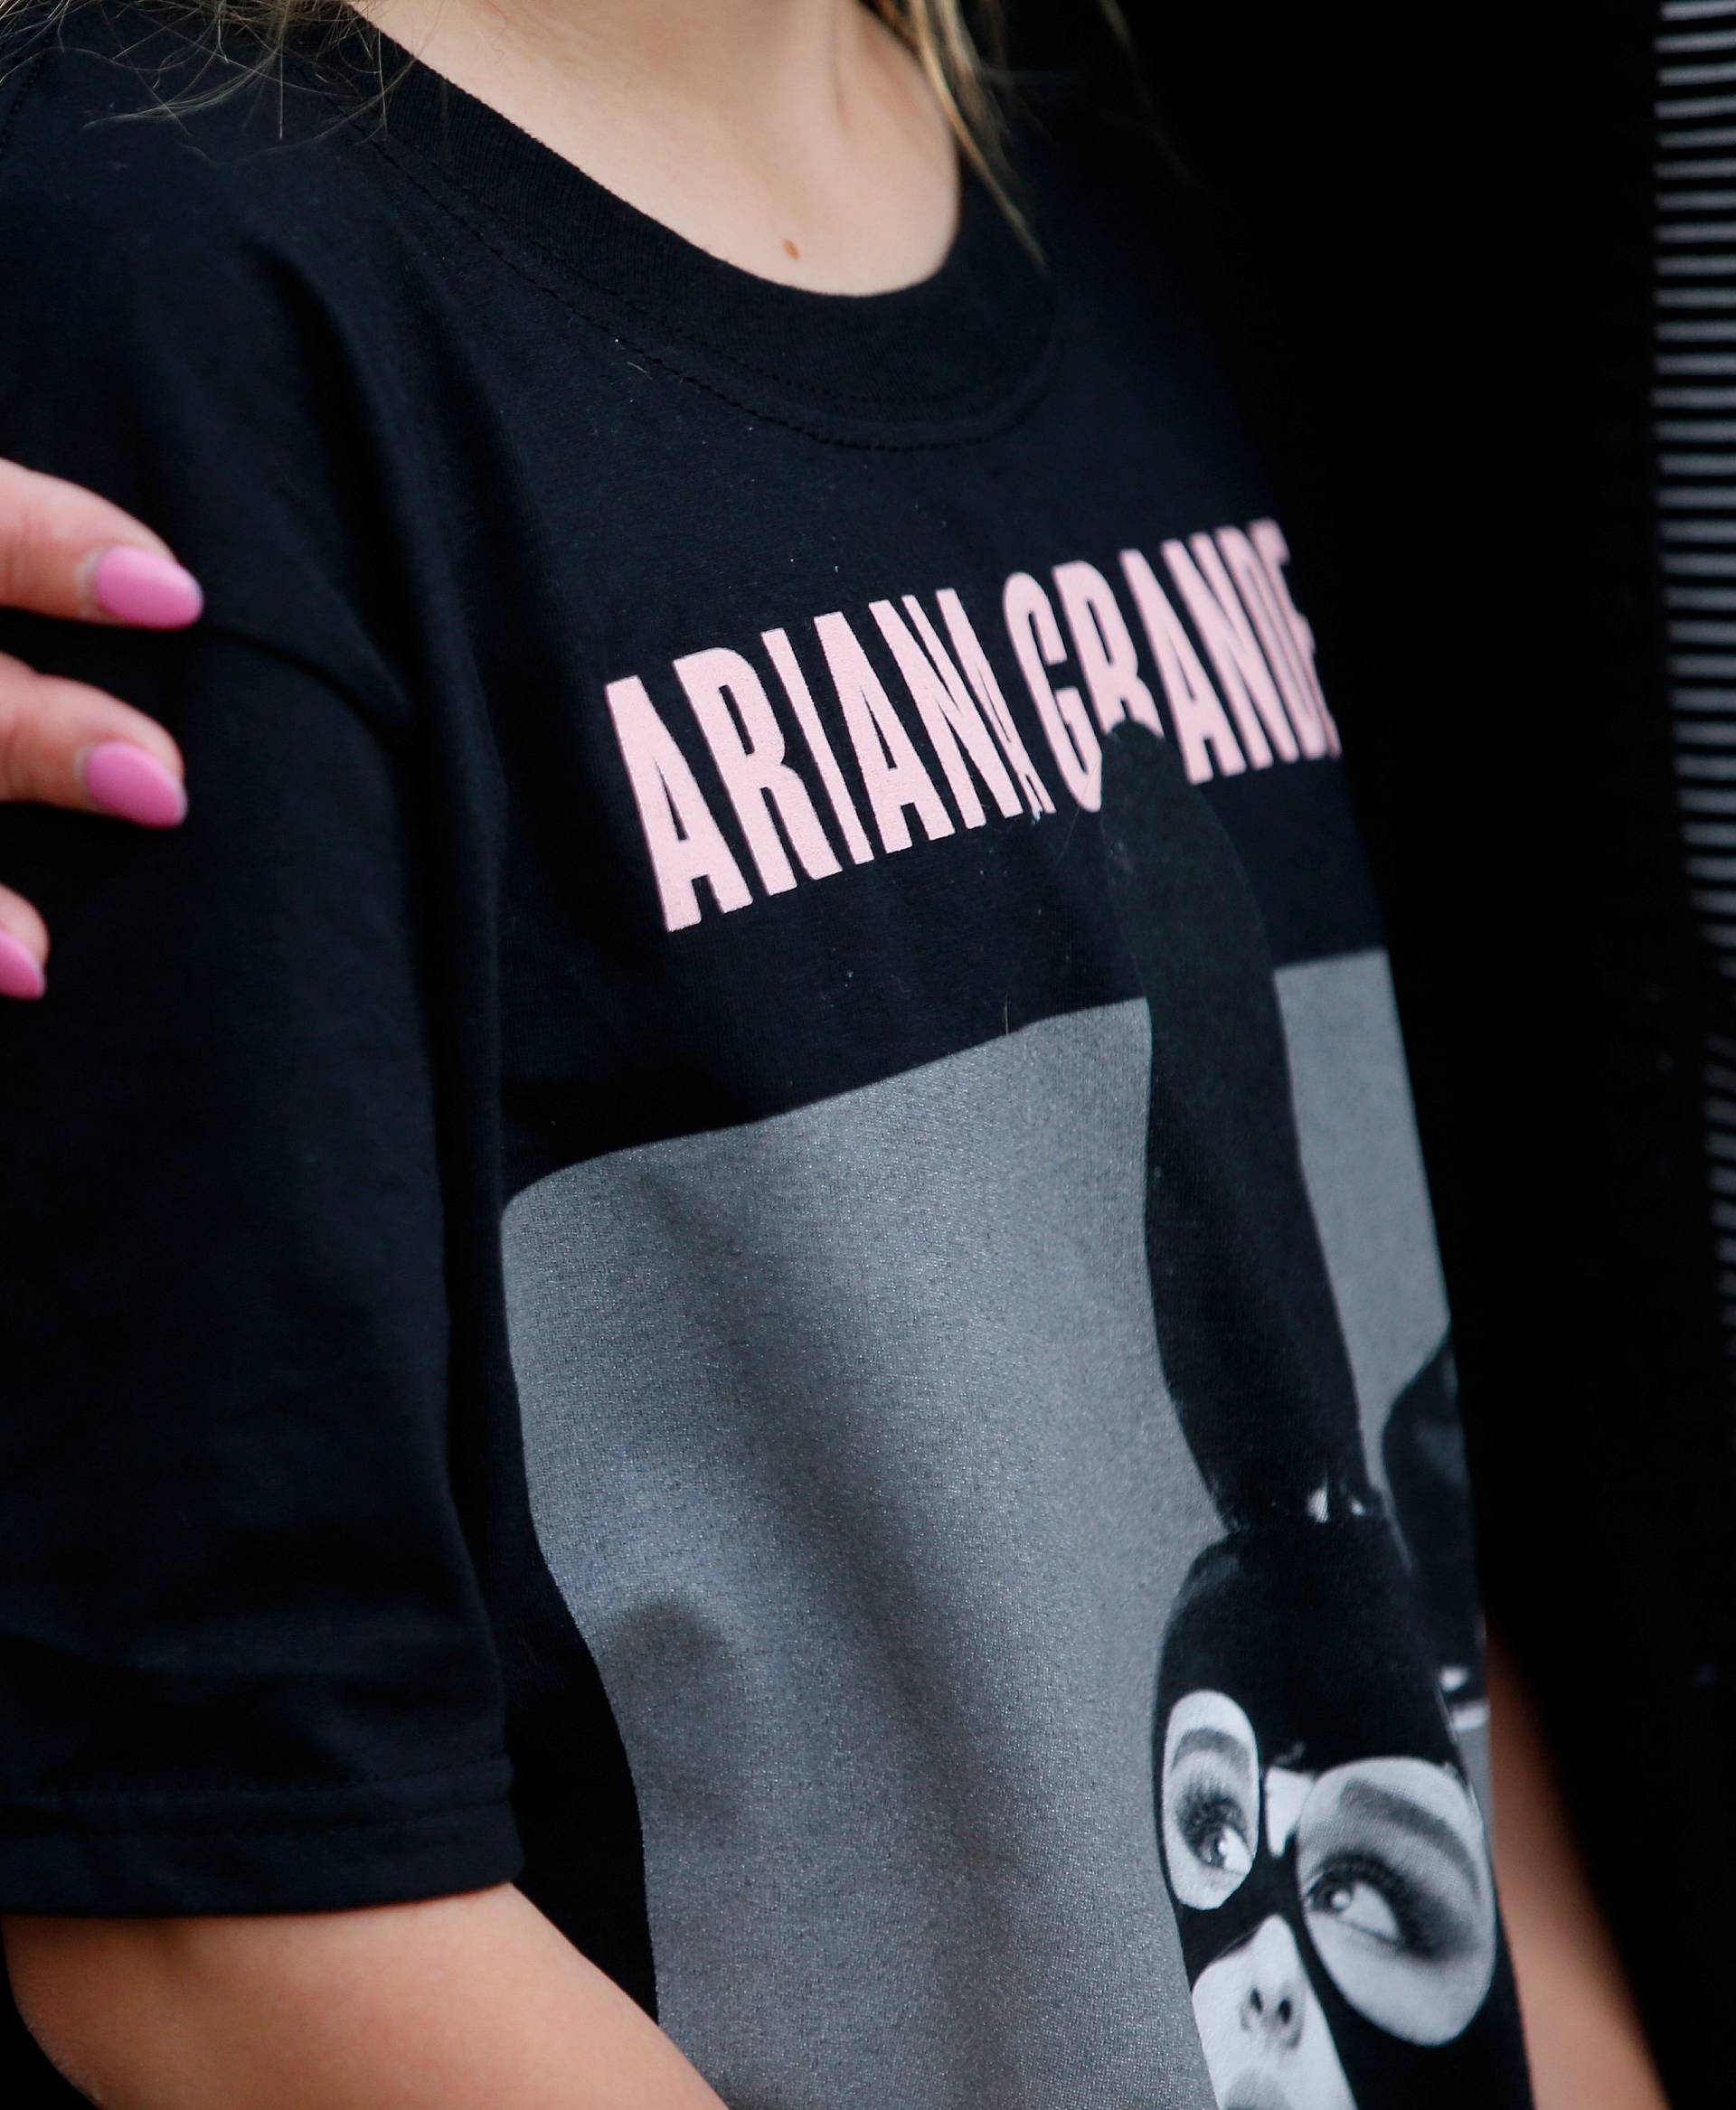 A youngster wearing a t-shirt showing U.S. singer Ariana Grande talks to the media near the Manchester Arena in Manchester